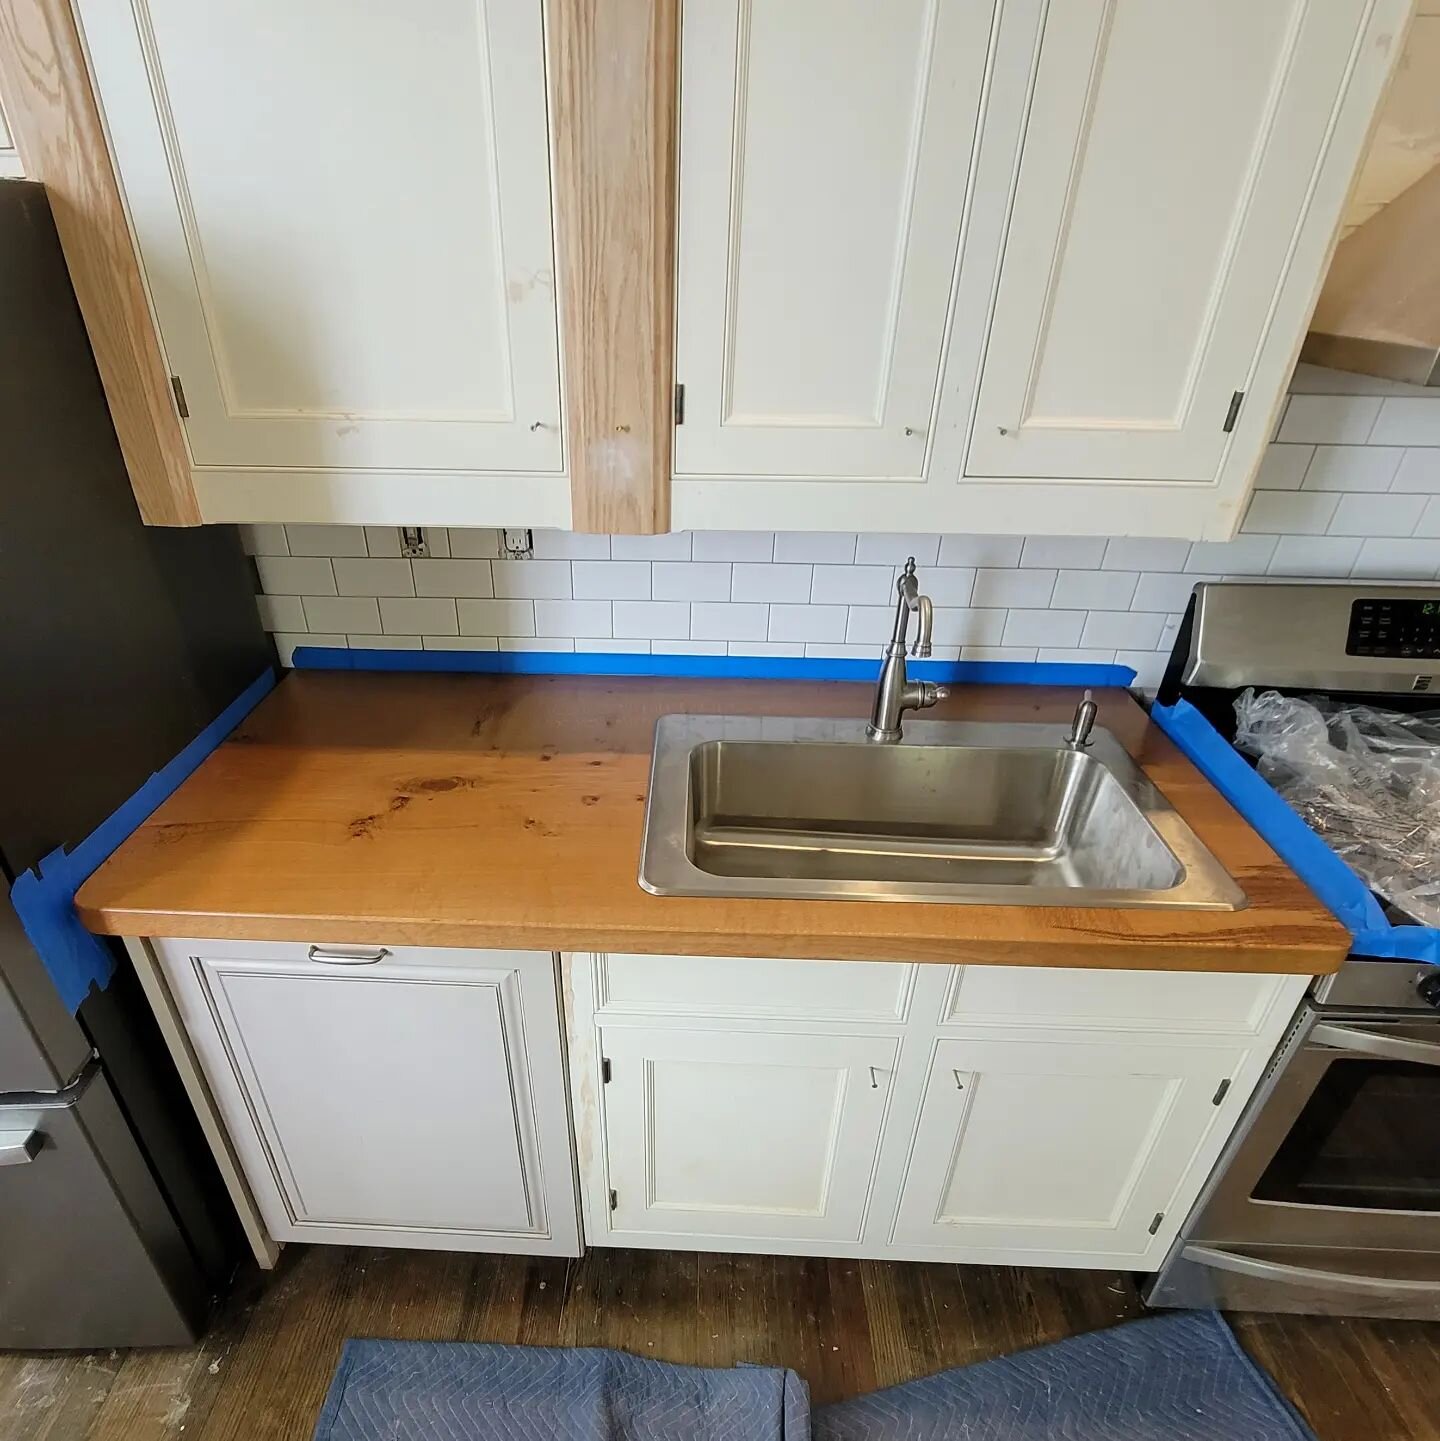 White oak works well for countertops, it's rot resistant and so hard that it just needs  a bit of Odies oil.